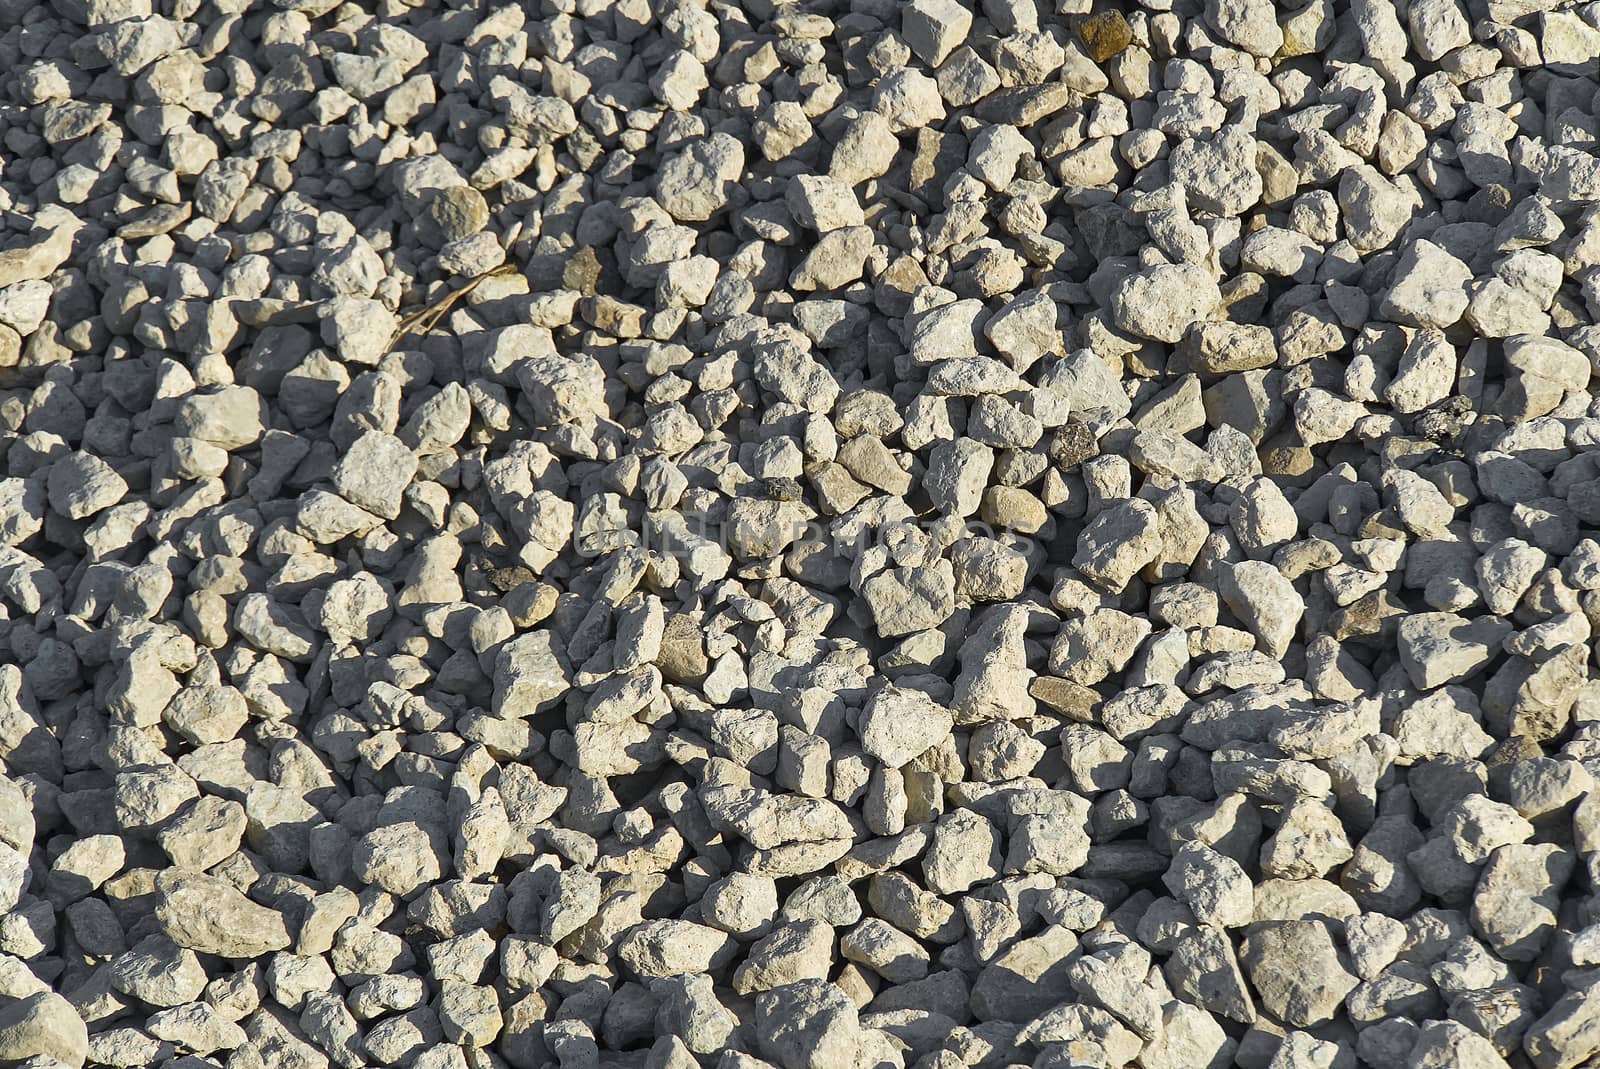 large crushed stone texture. Small pebble stones on construction site. gravel pebble stones background